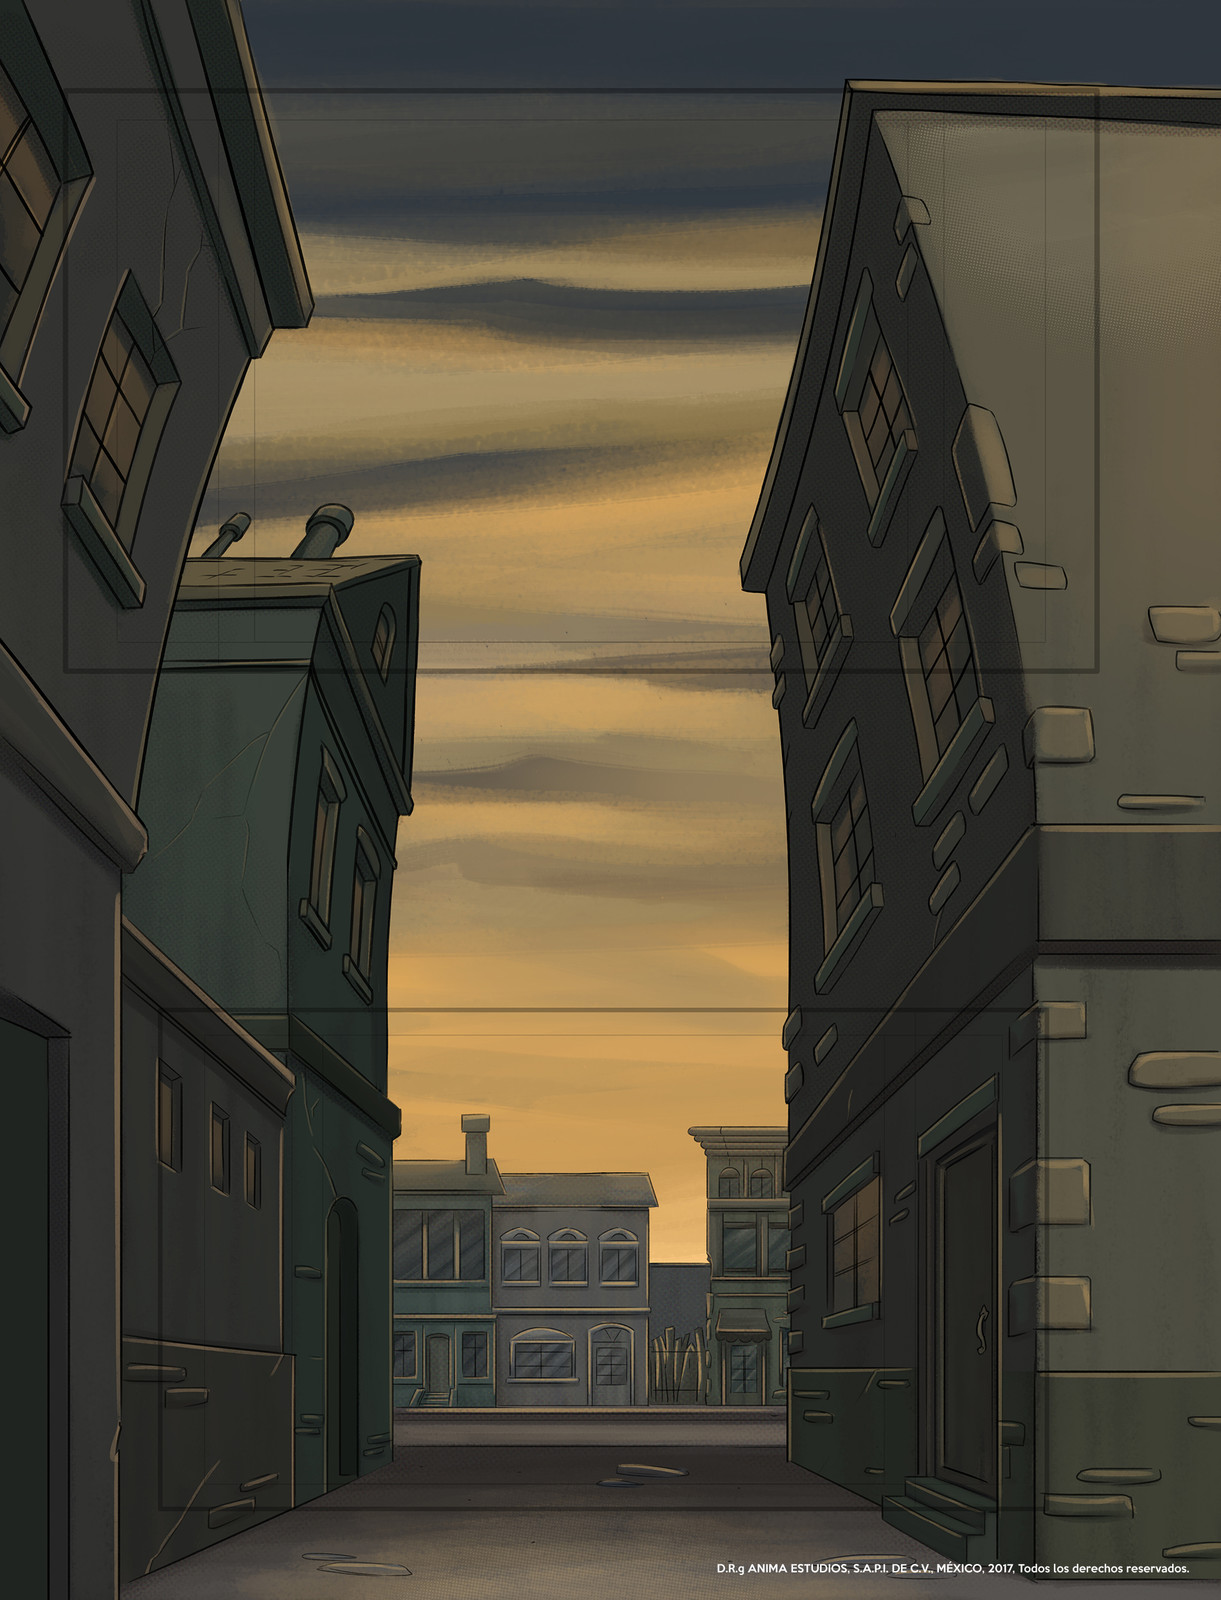 One of the last shots of the episode where the camera looks upwards from the street to see the passing airship.